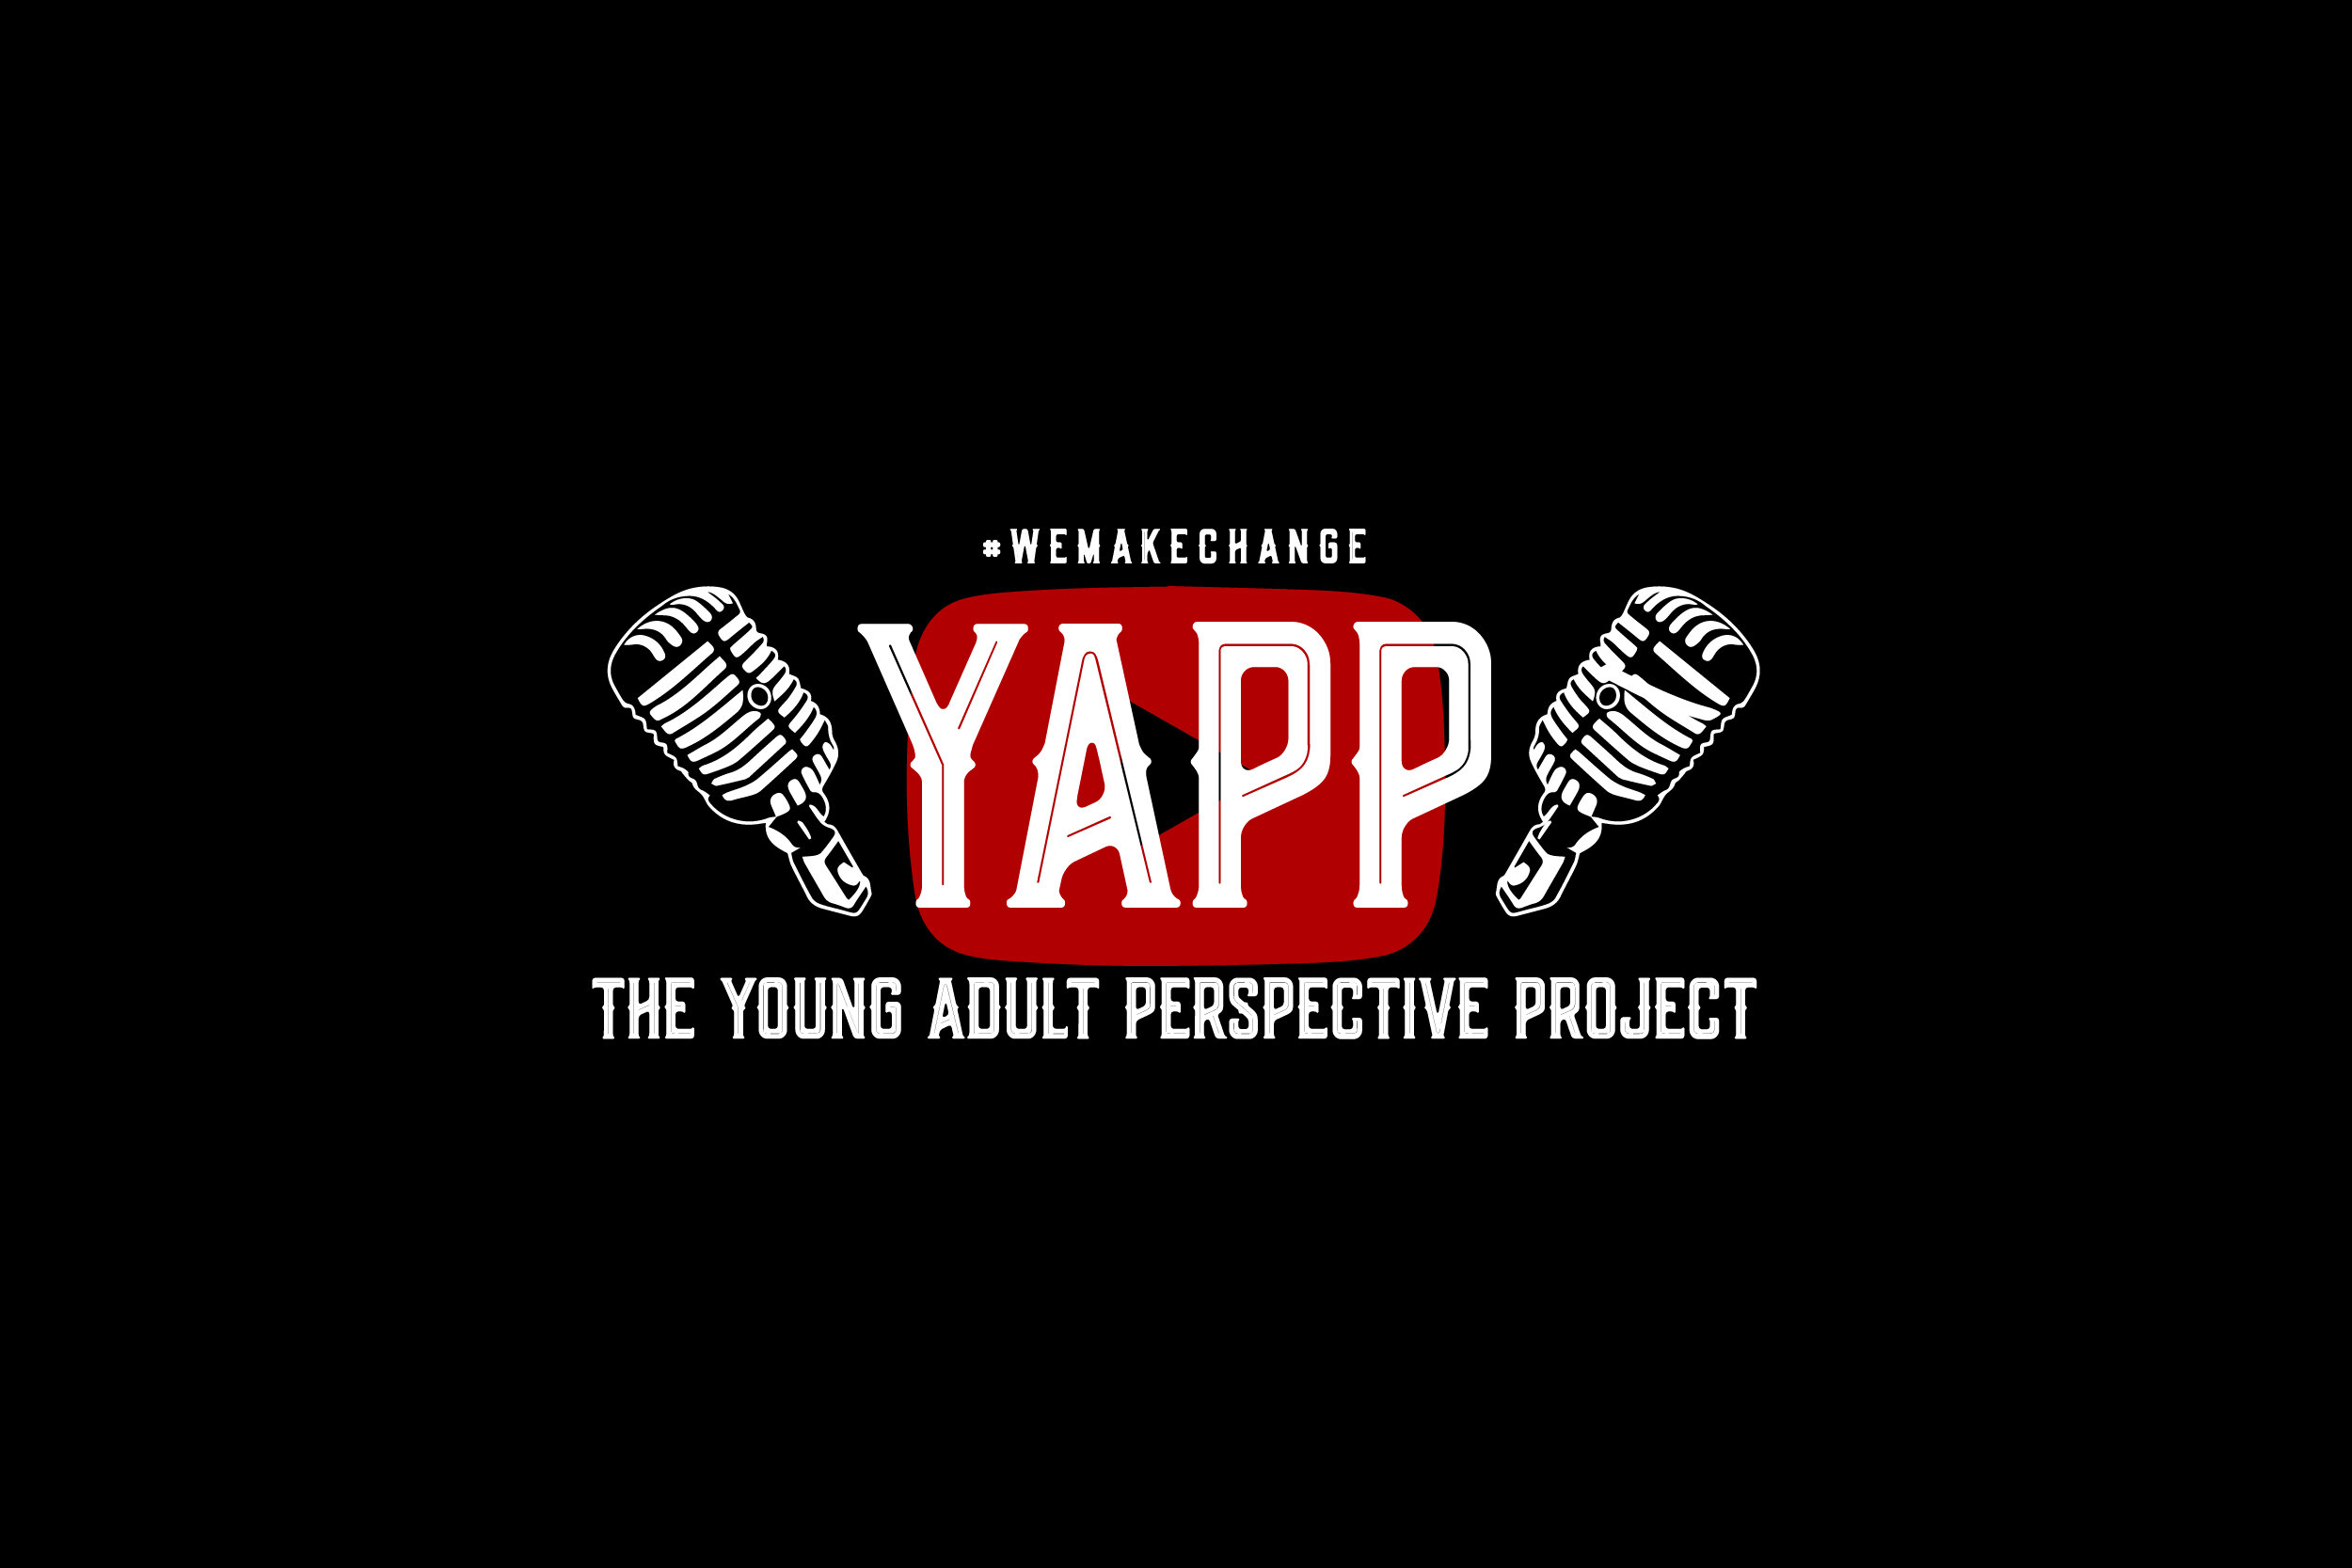 YAPP The Young Adult Perspective Project r1-02.jpg